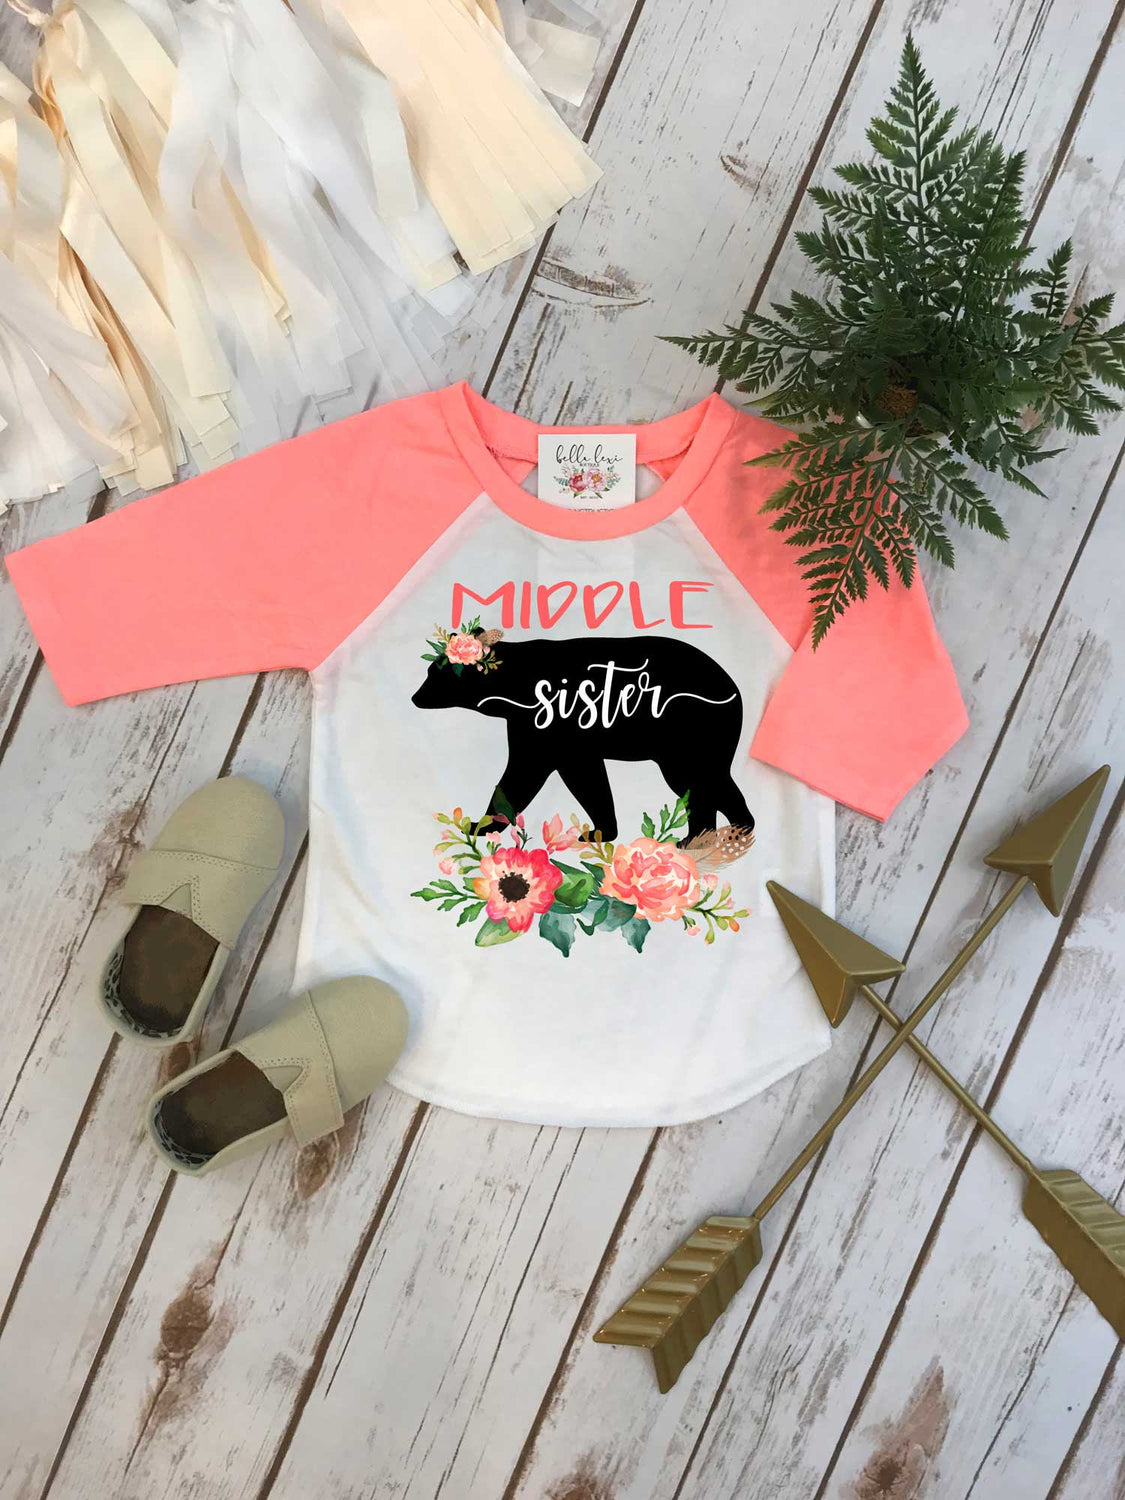 MIDDLE Sister Shirt, Floral Bear, Sisters Shirts, Sister Bear Shirt, Sister Shirt, Family tees, Big Sister Reveal, Big Sister Announcement